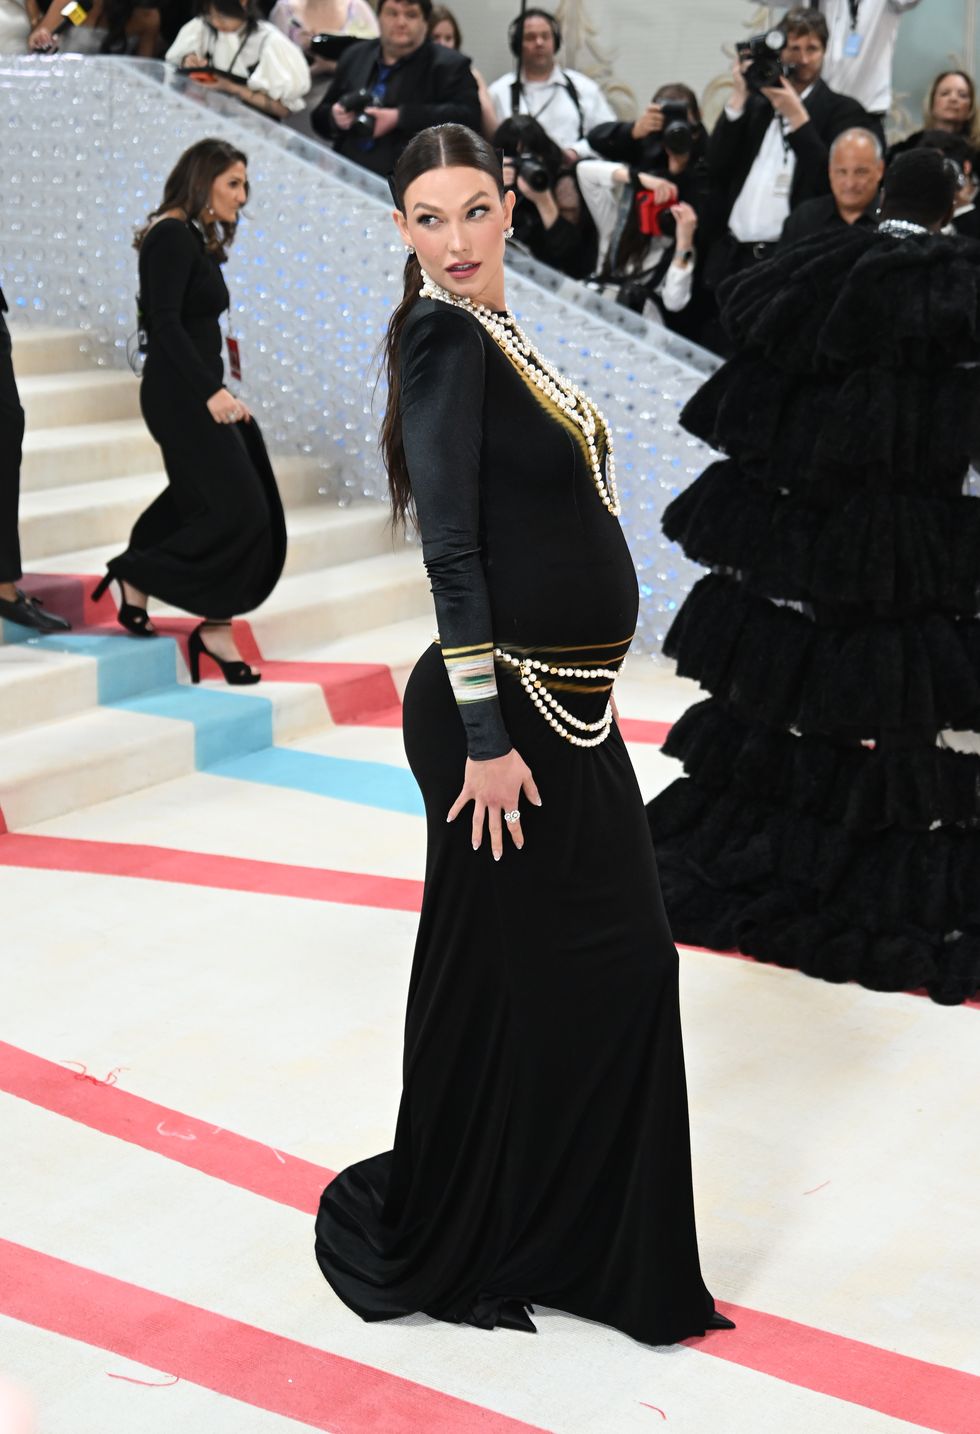 new york, new york may 01 karlie kloss attends the 2023 met gala celebrating karl lagerfeld a line of beauty at the metropolitan museum of art on may 01, 2023 in new york city photo by noam galaigathe hollywood reporter via getty images